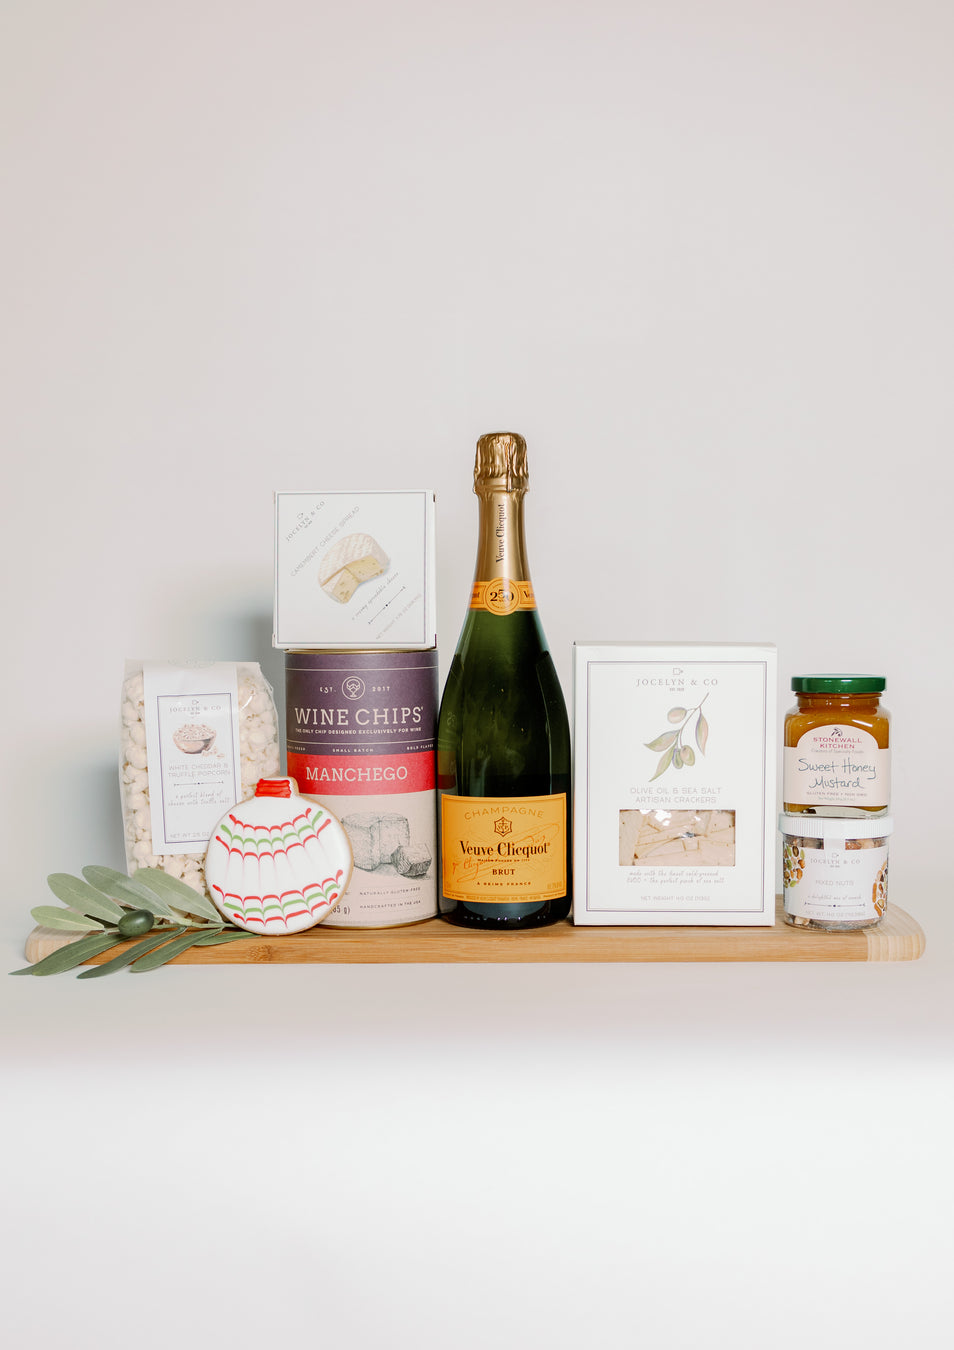 Seasons greetings with veuve cliquot